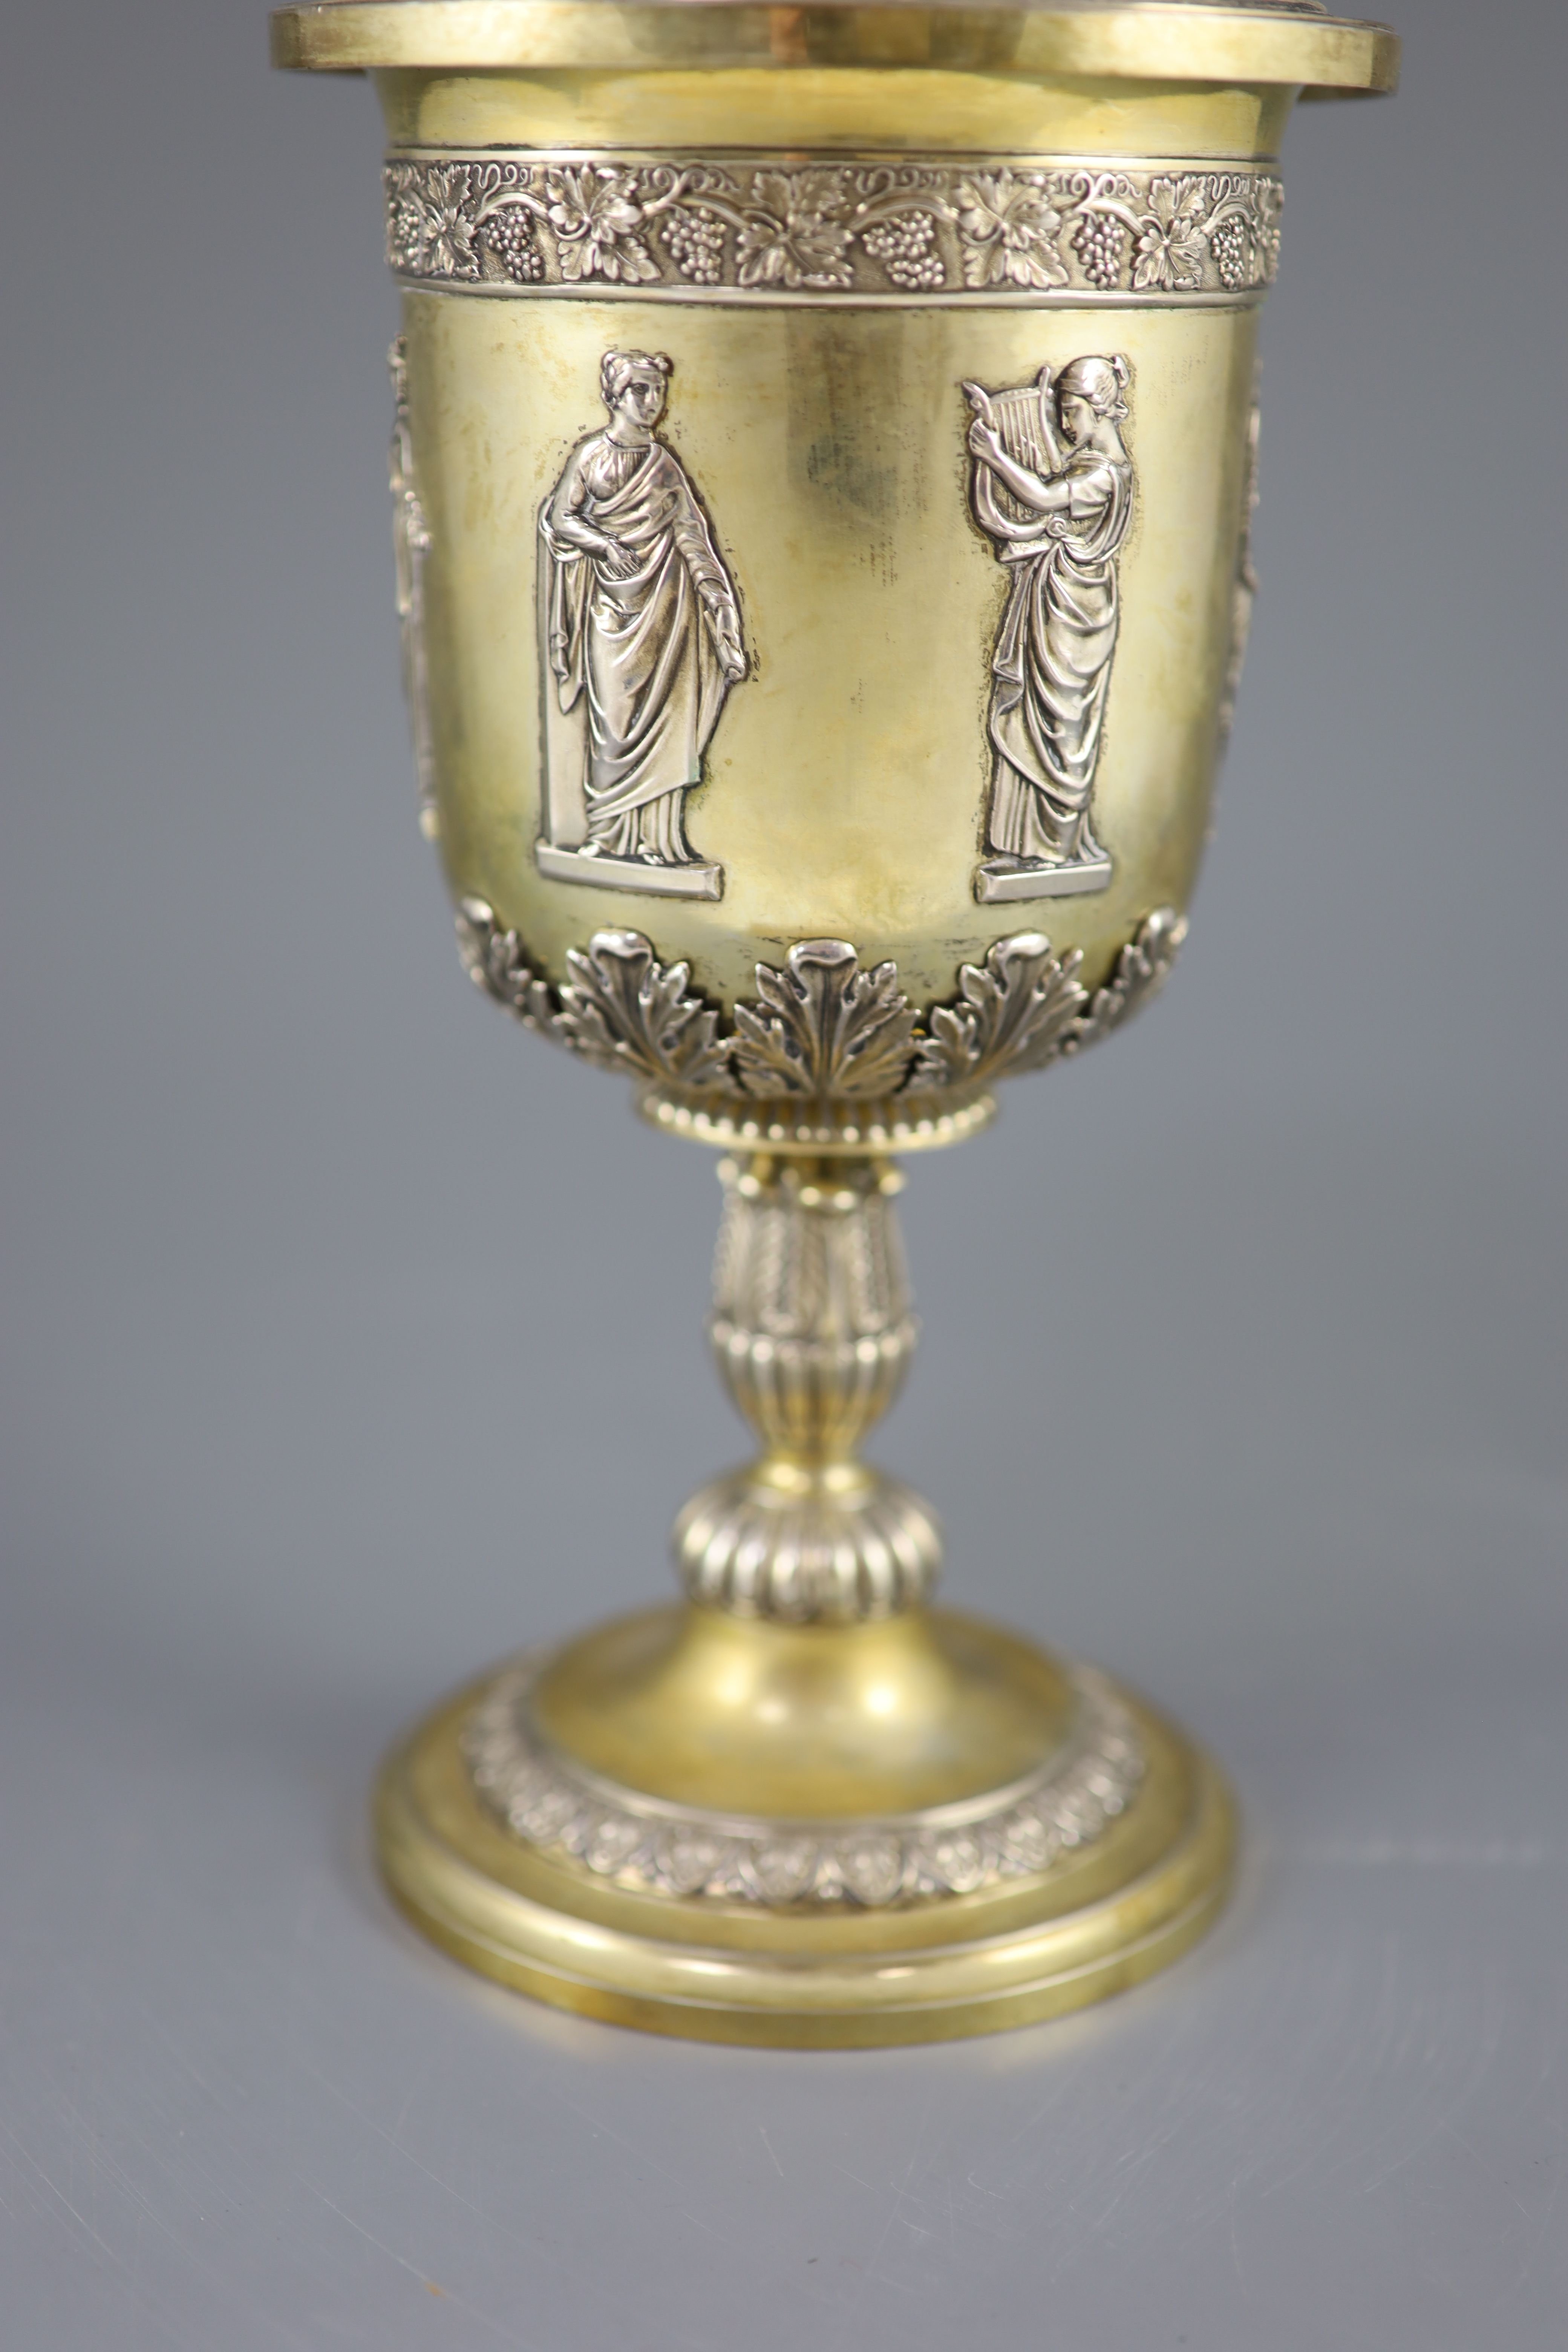 A late 19th/early 20th century German parcel gilt 800 standard presentation pedestal cup and cover, by Wollenweber,